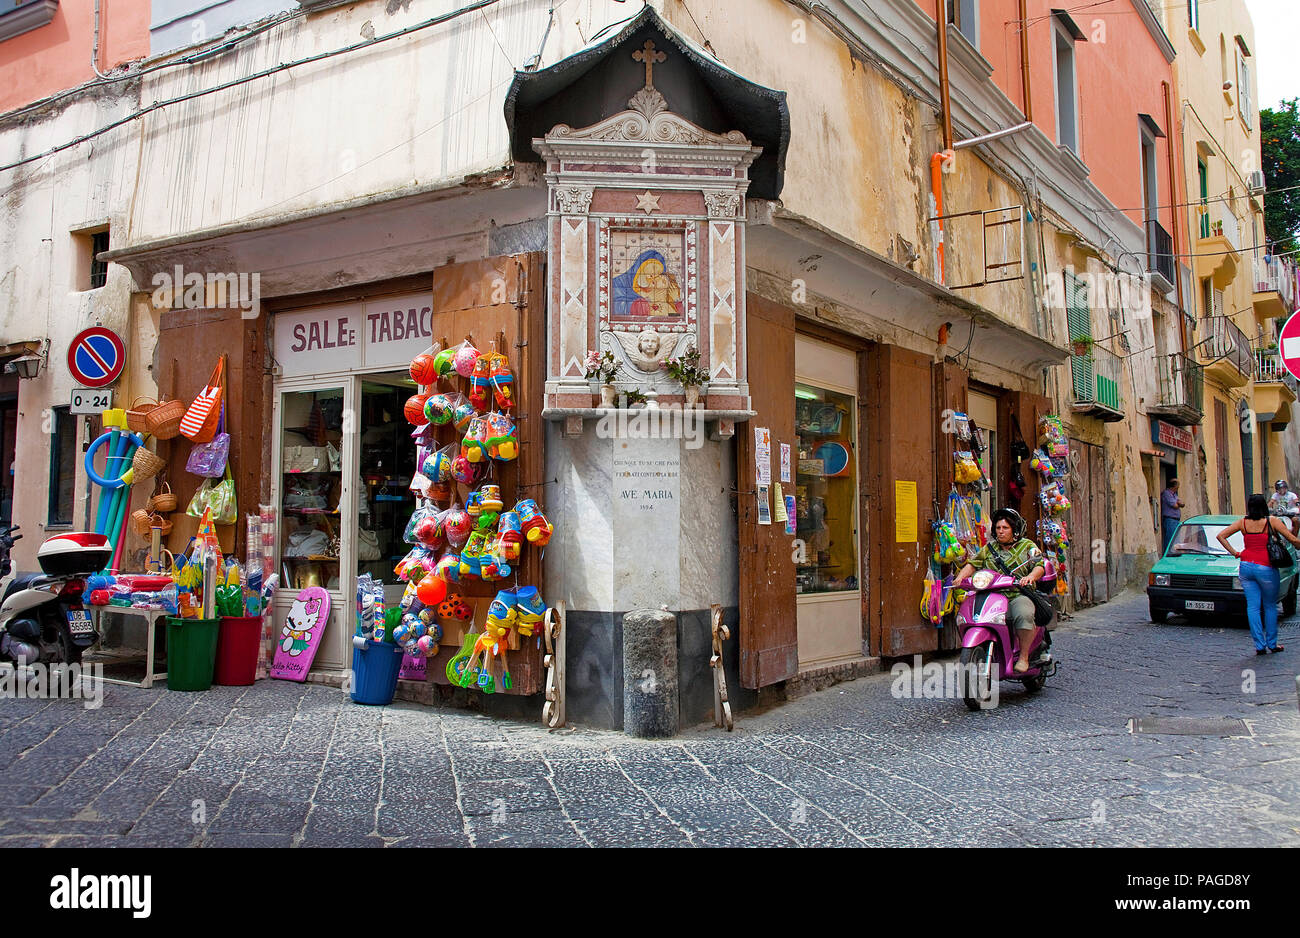 Images of Saints at a junction with souvenir shops, old town of Procida island, Gulf of Naples, Italy Stock Photo